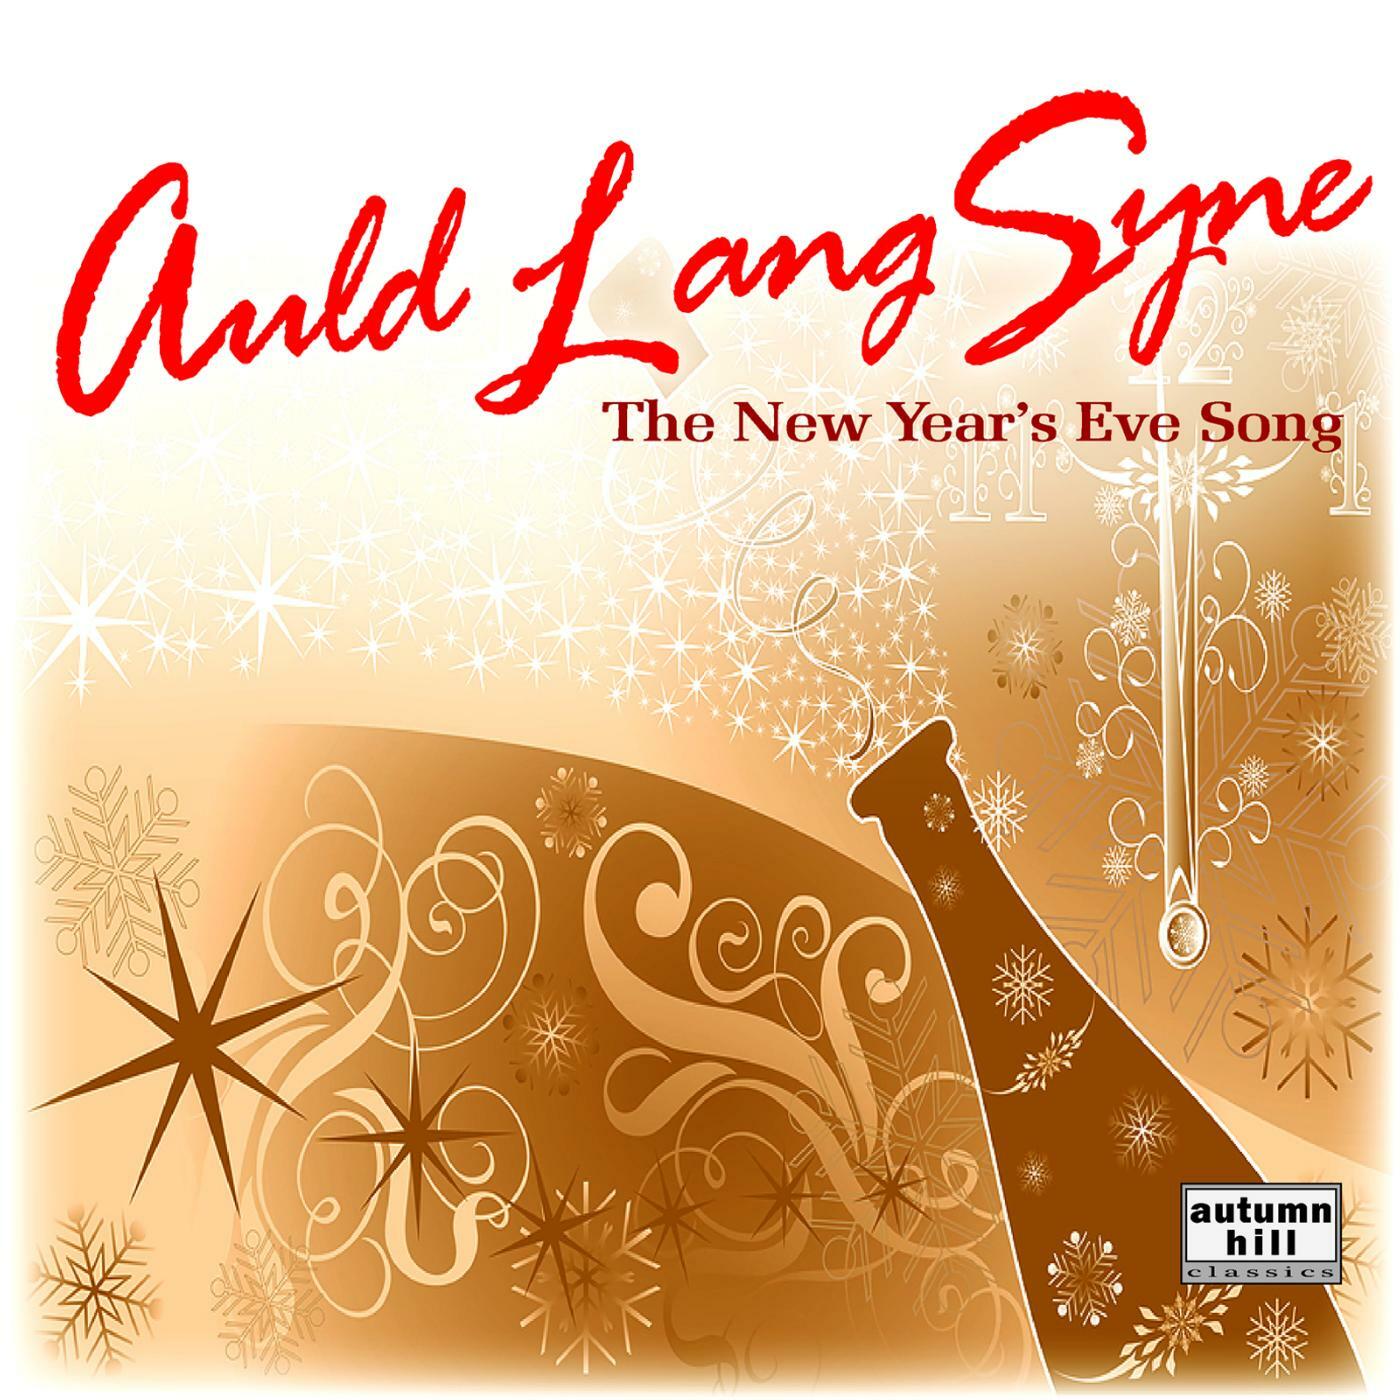 New year's song. New year Eve. New year Songs. On New years Eve. A memorable New year’s Eve.